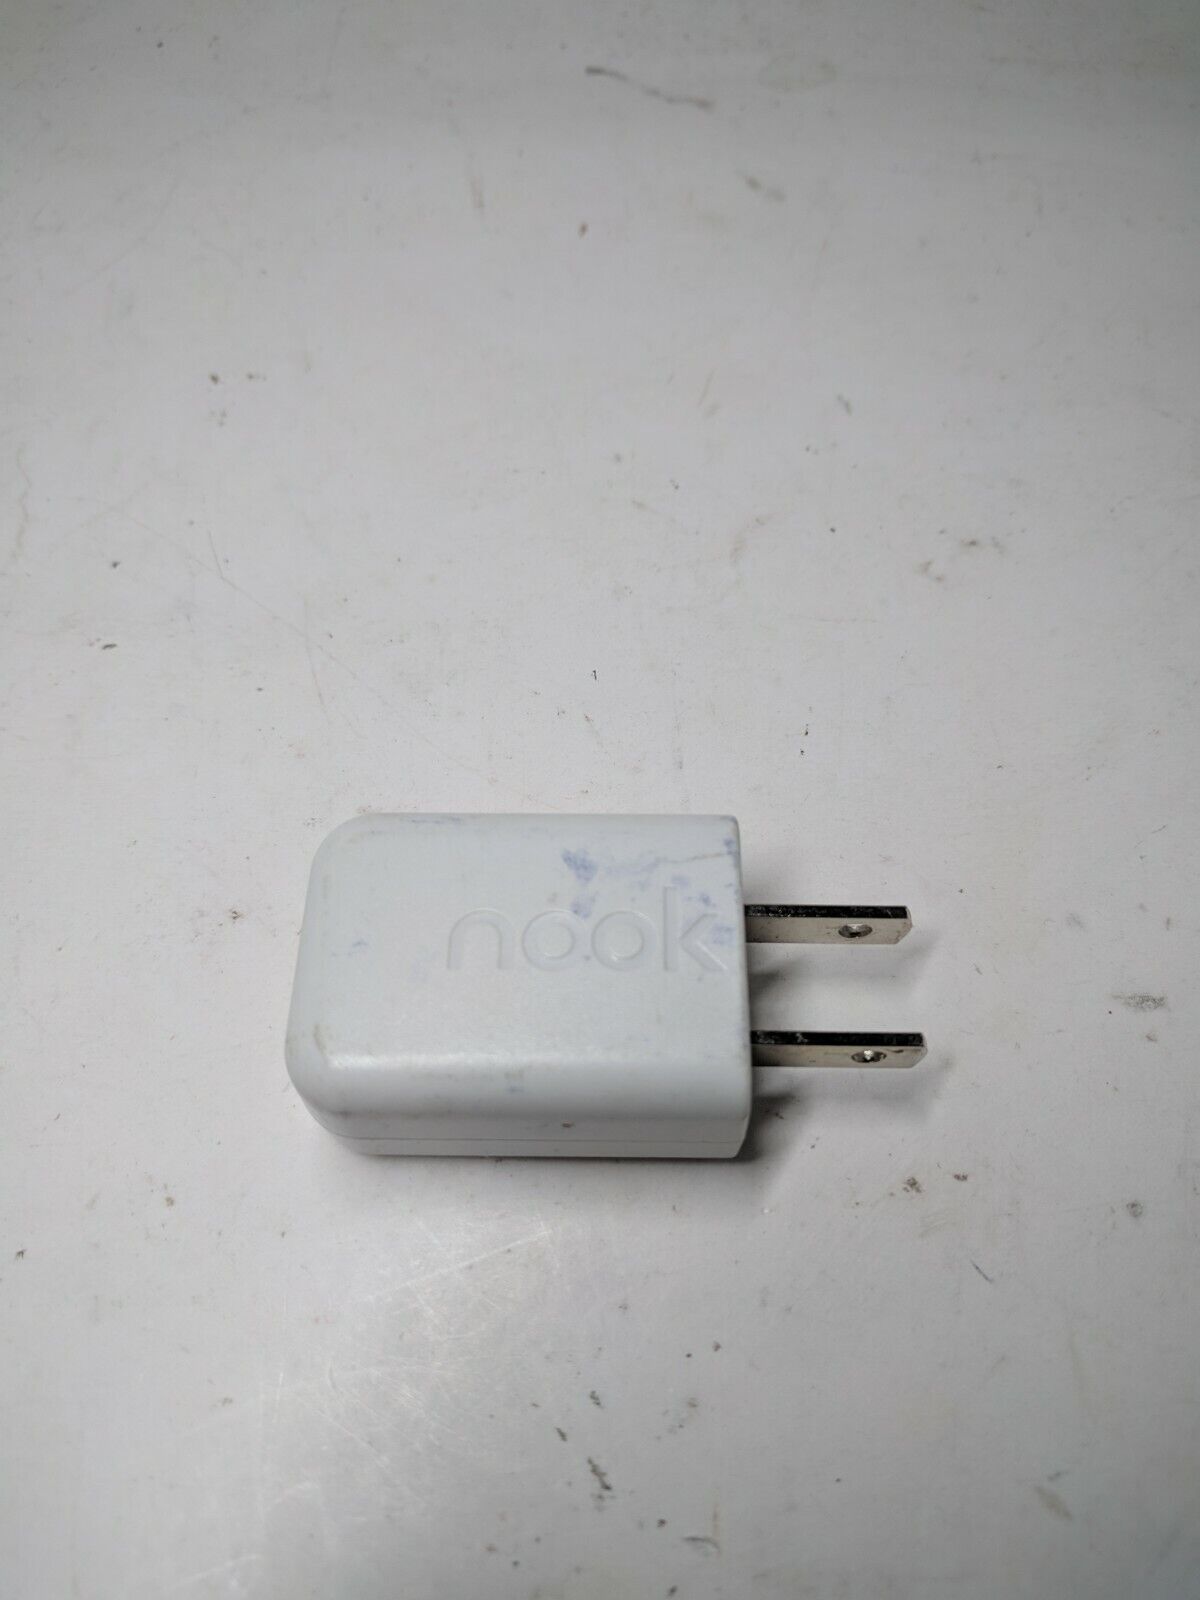 Barnes & Noble BNRP5-850 OEM USB AC Wall Charger Nook Power Ad...